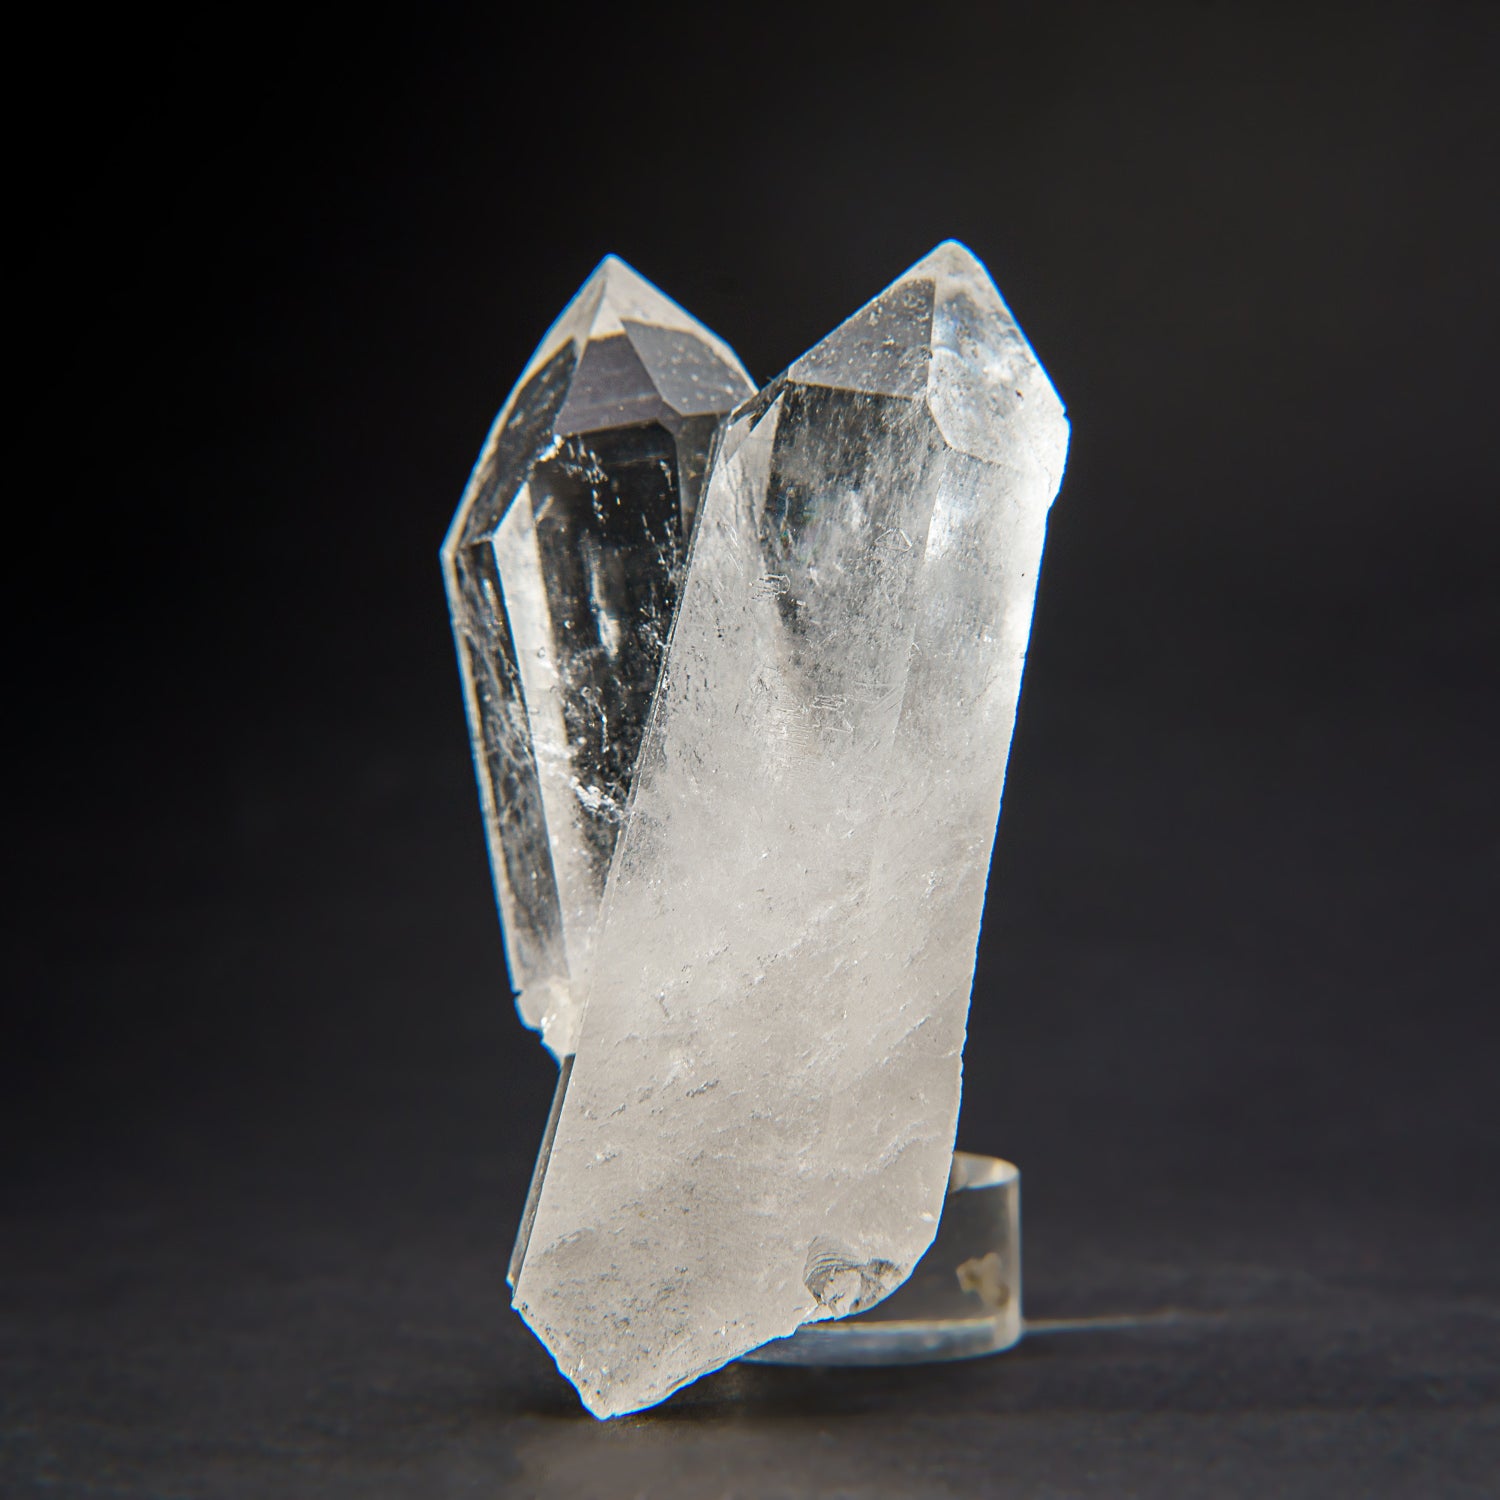 Genuine Clear Quartz Crystal Cluster Point from Brazil (210.8 grams)